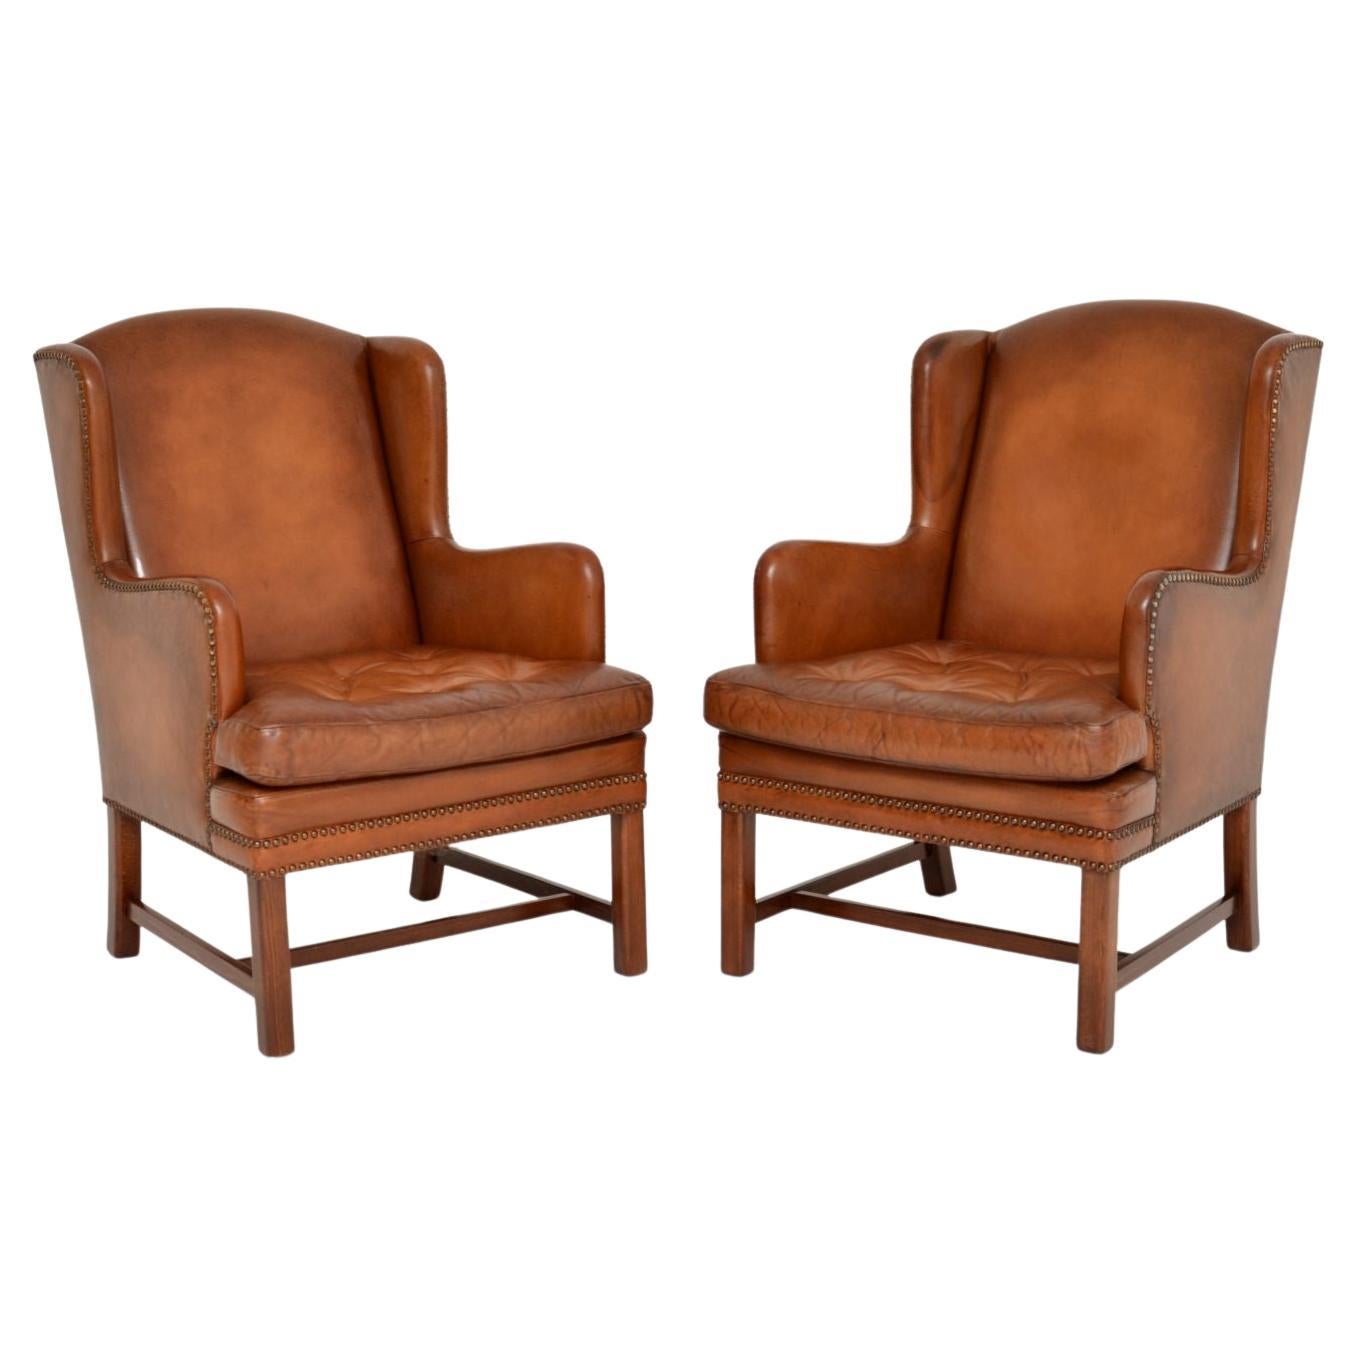 Pair of Antique Swedish Leather Wing Back Armchairs